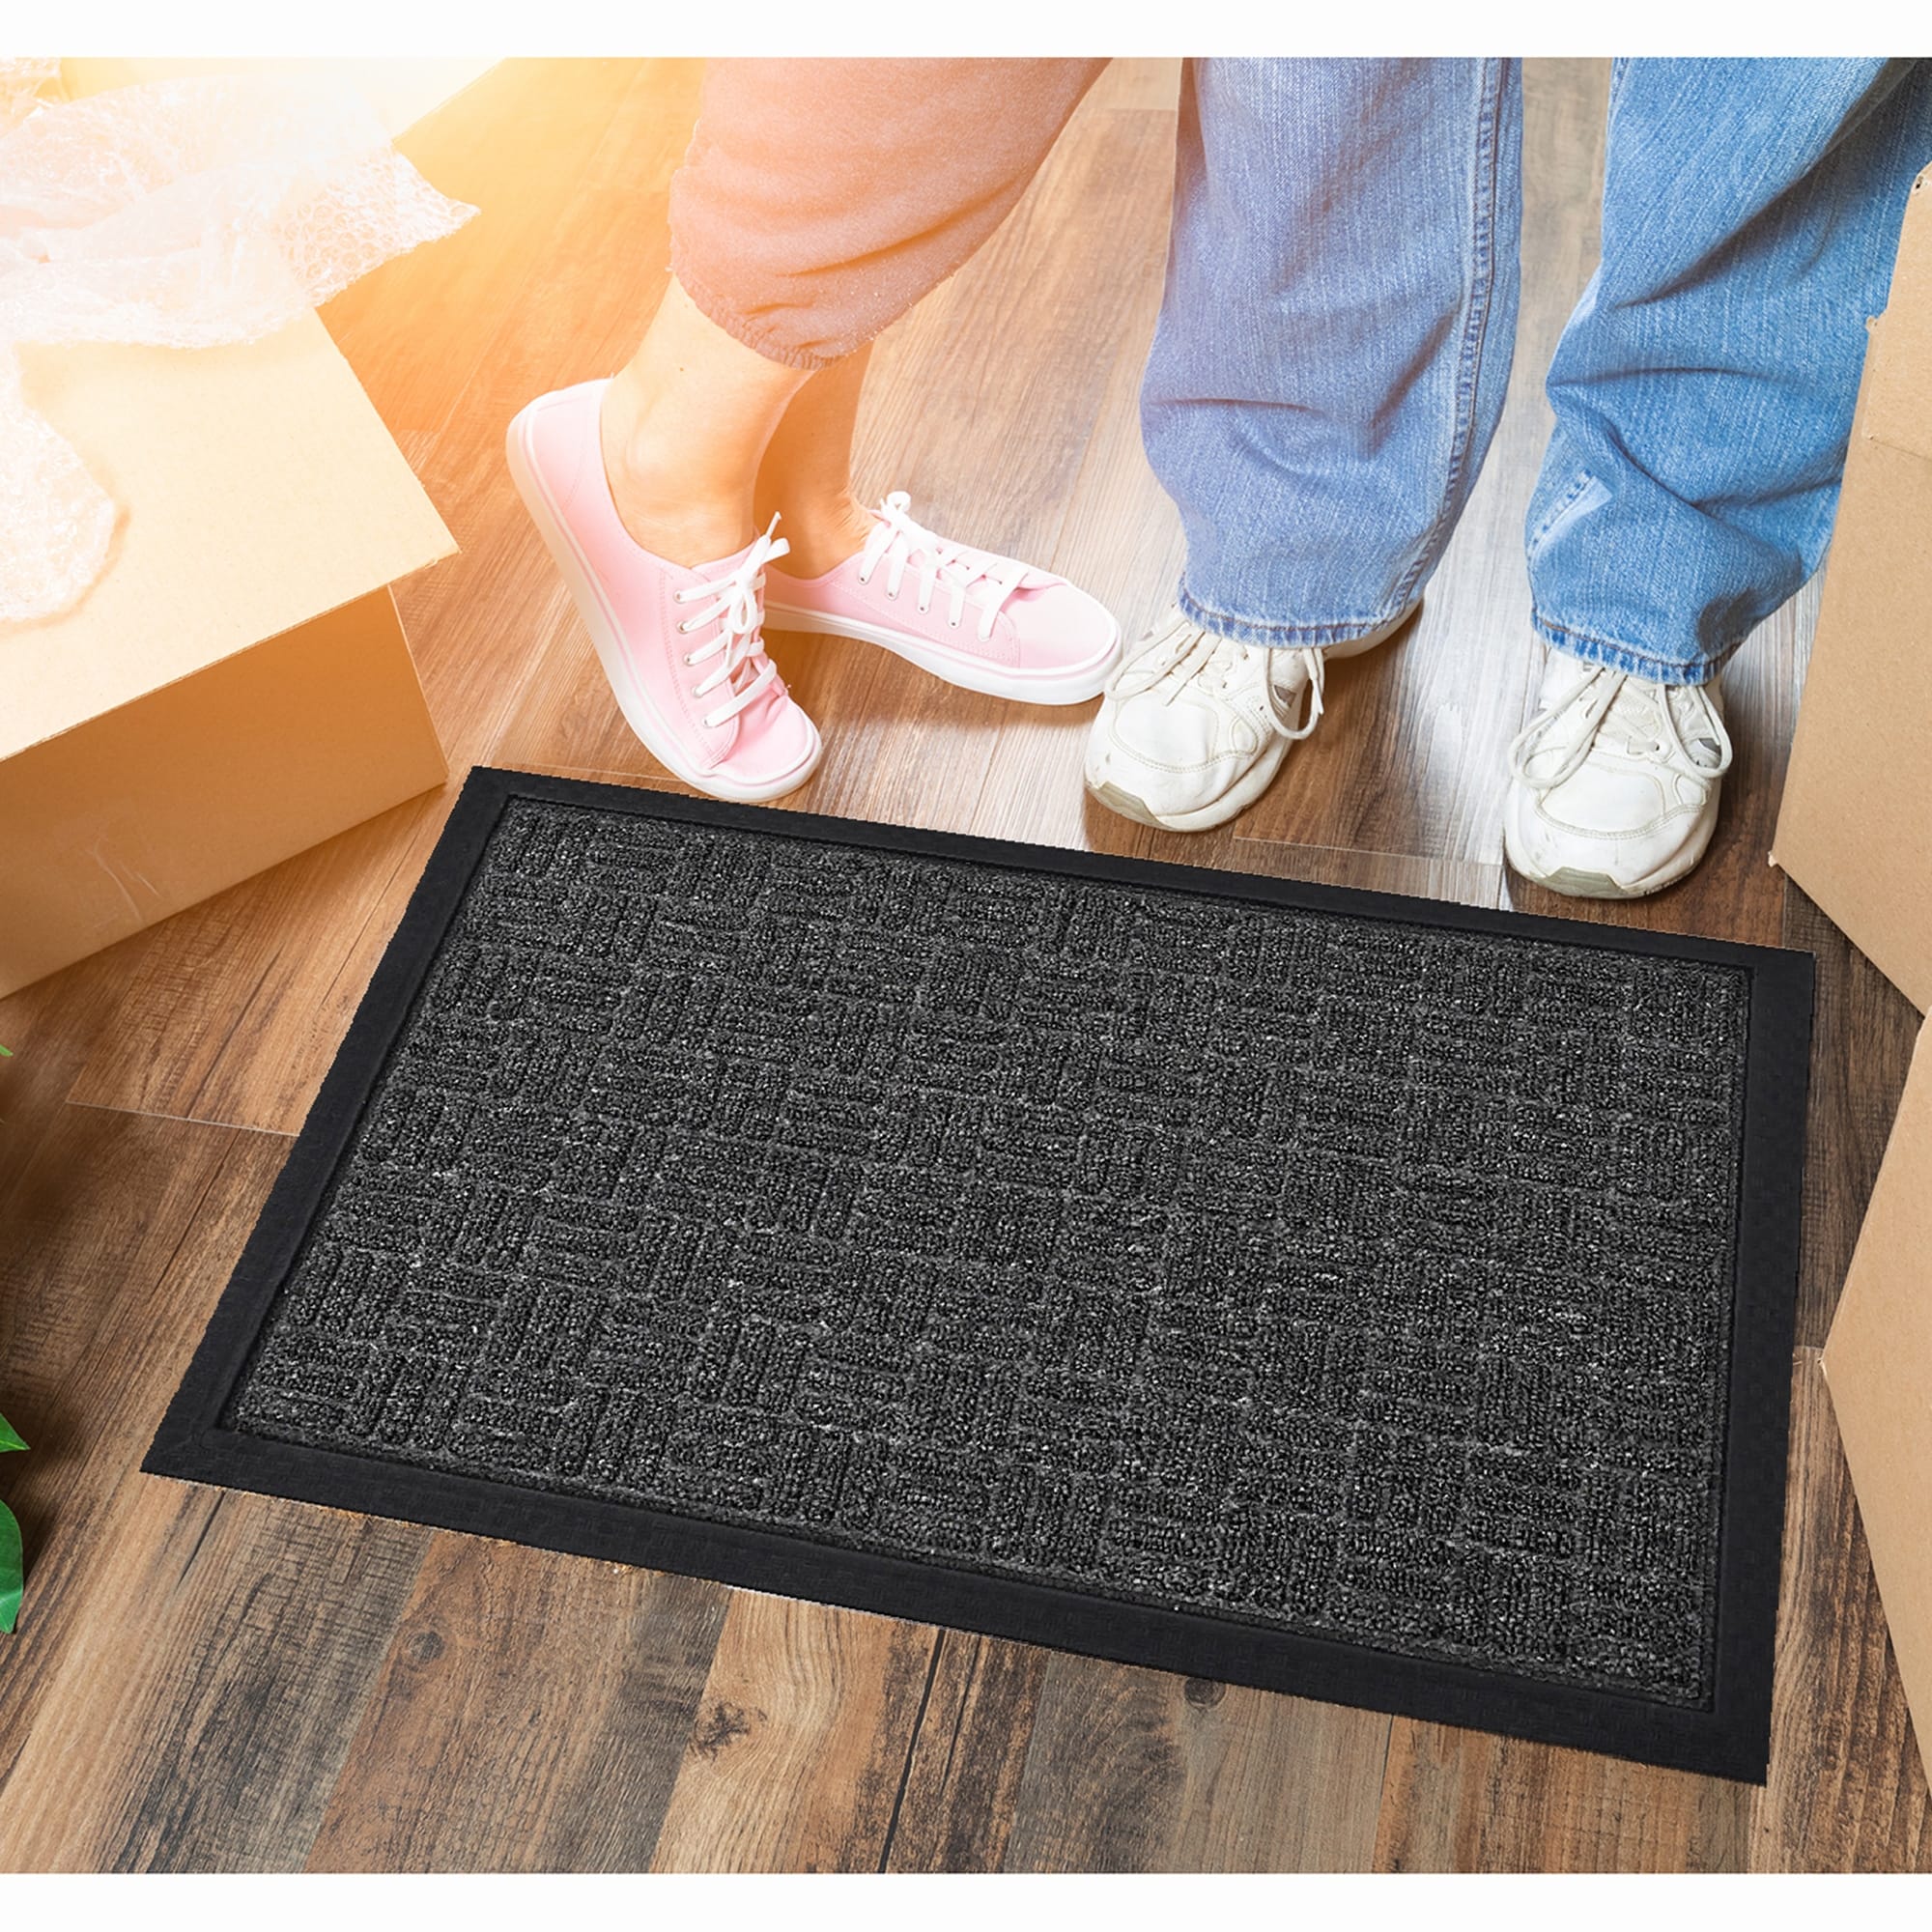 Kaluns Solid Front Doormat, Super Absorbent. 24 in x 36 in (Blue)